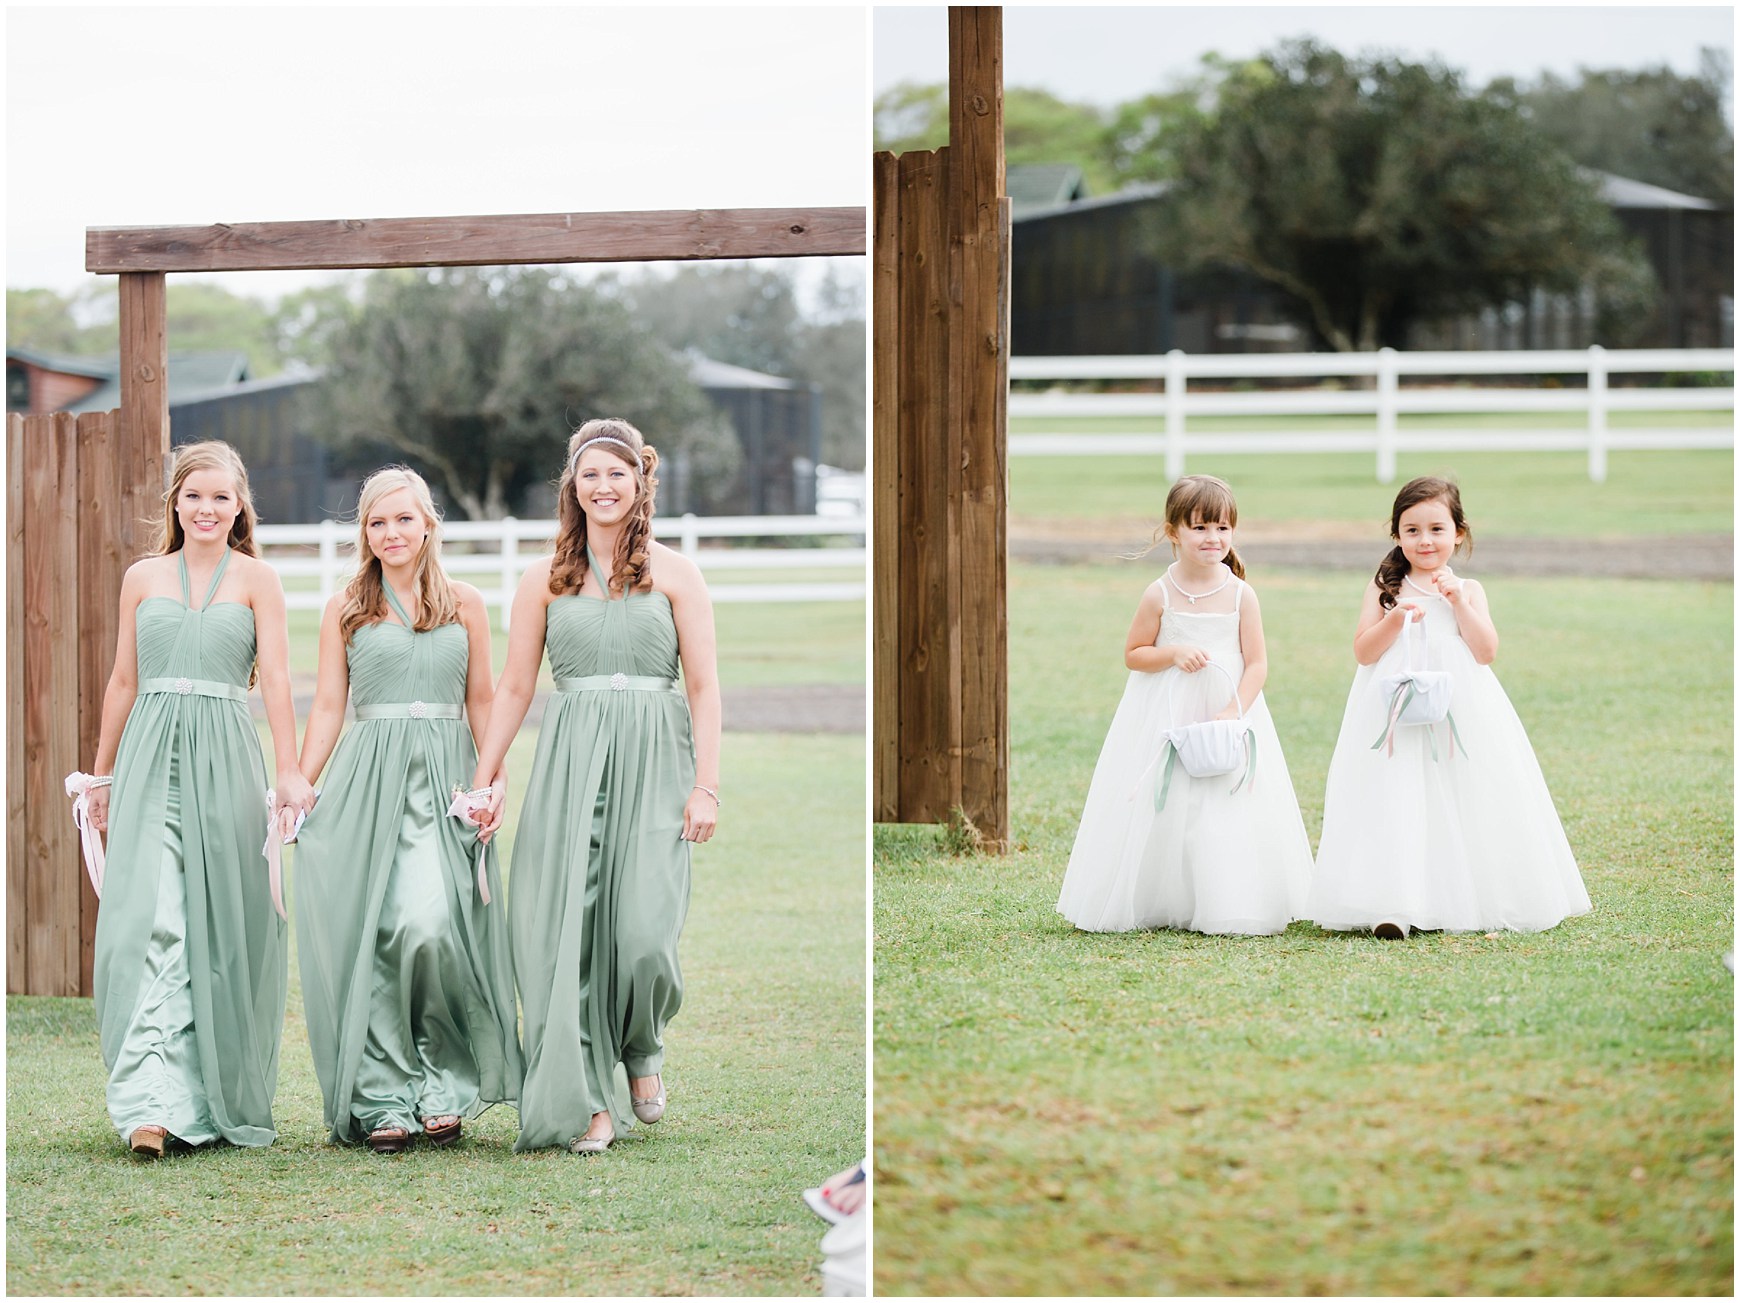 Bridesmaids and flower girls walking down the aisle